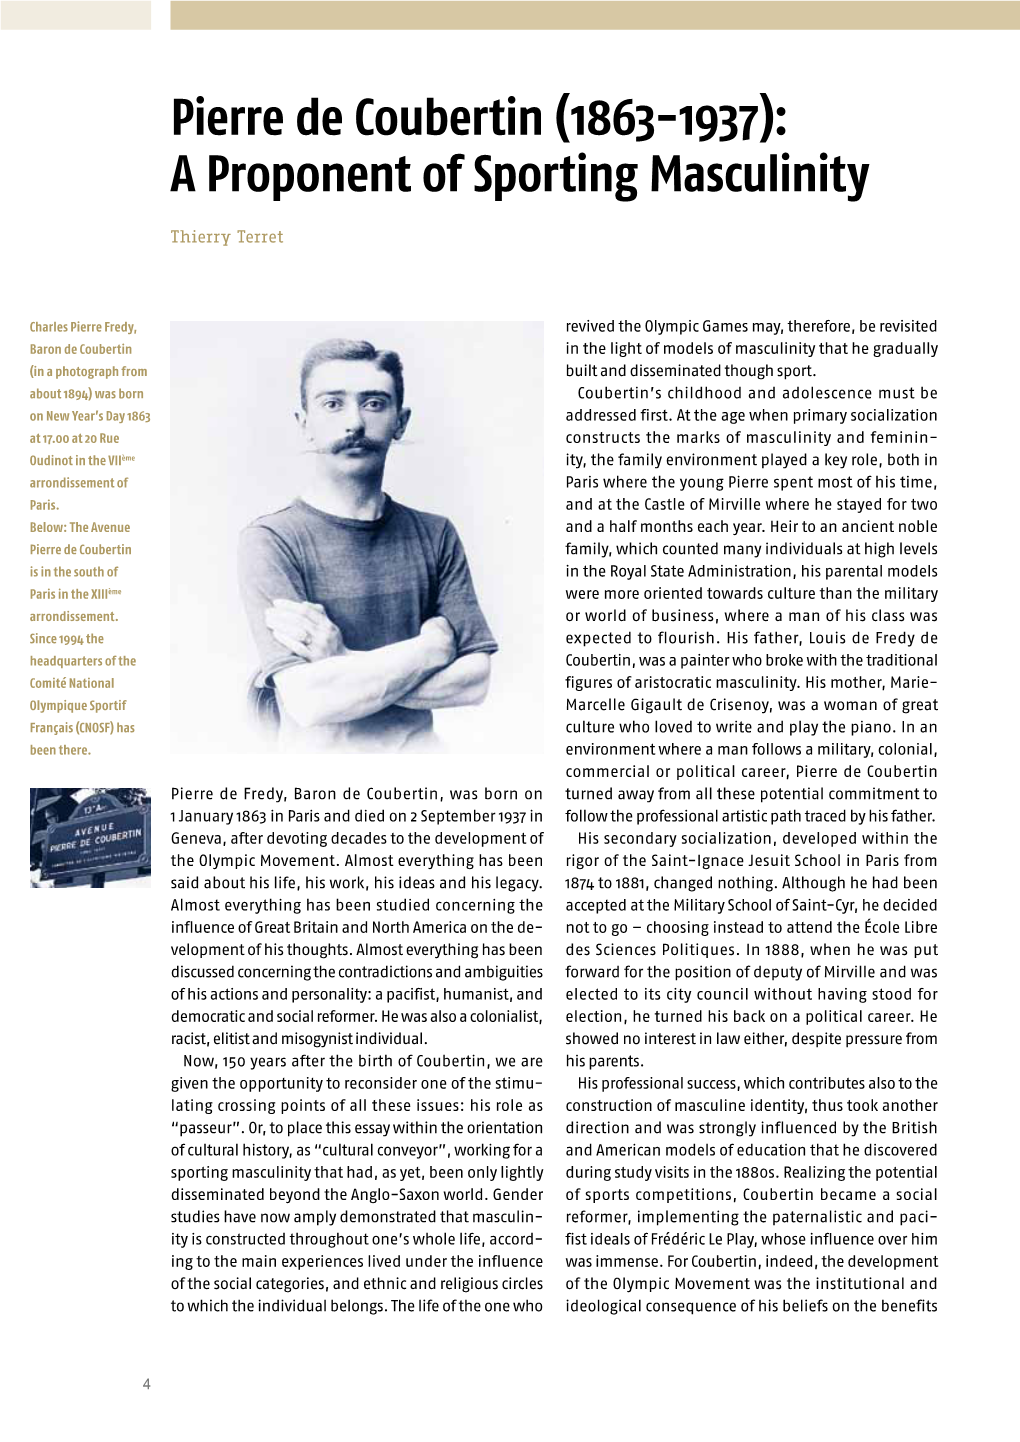 Pierre De Coubertin (1863-1937): a Proponent of Sporting Masculinity